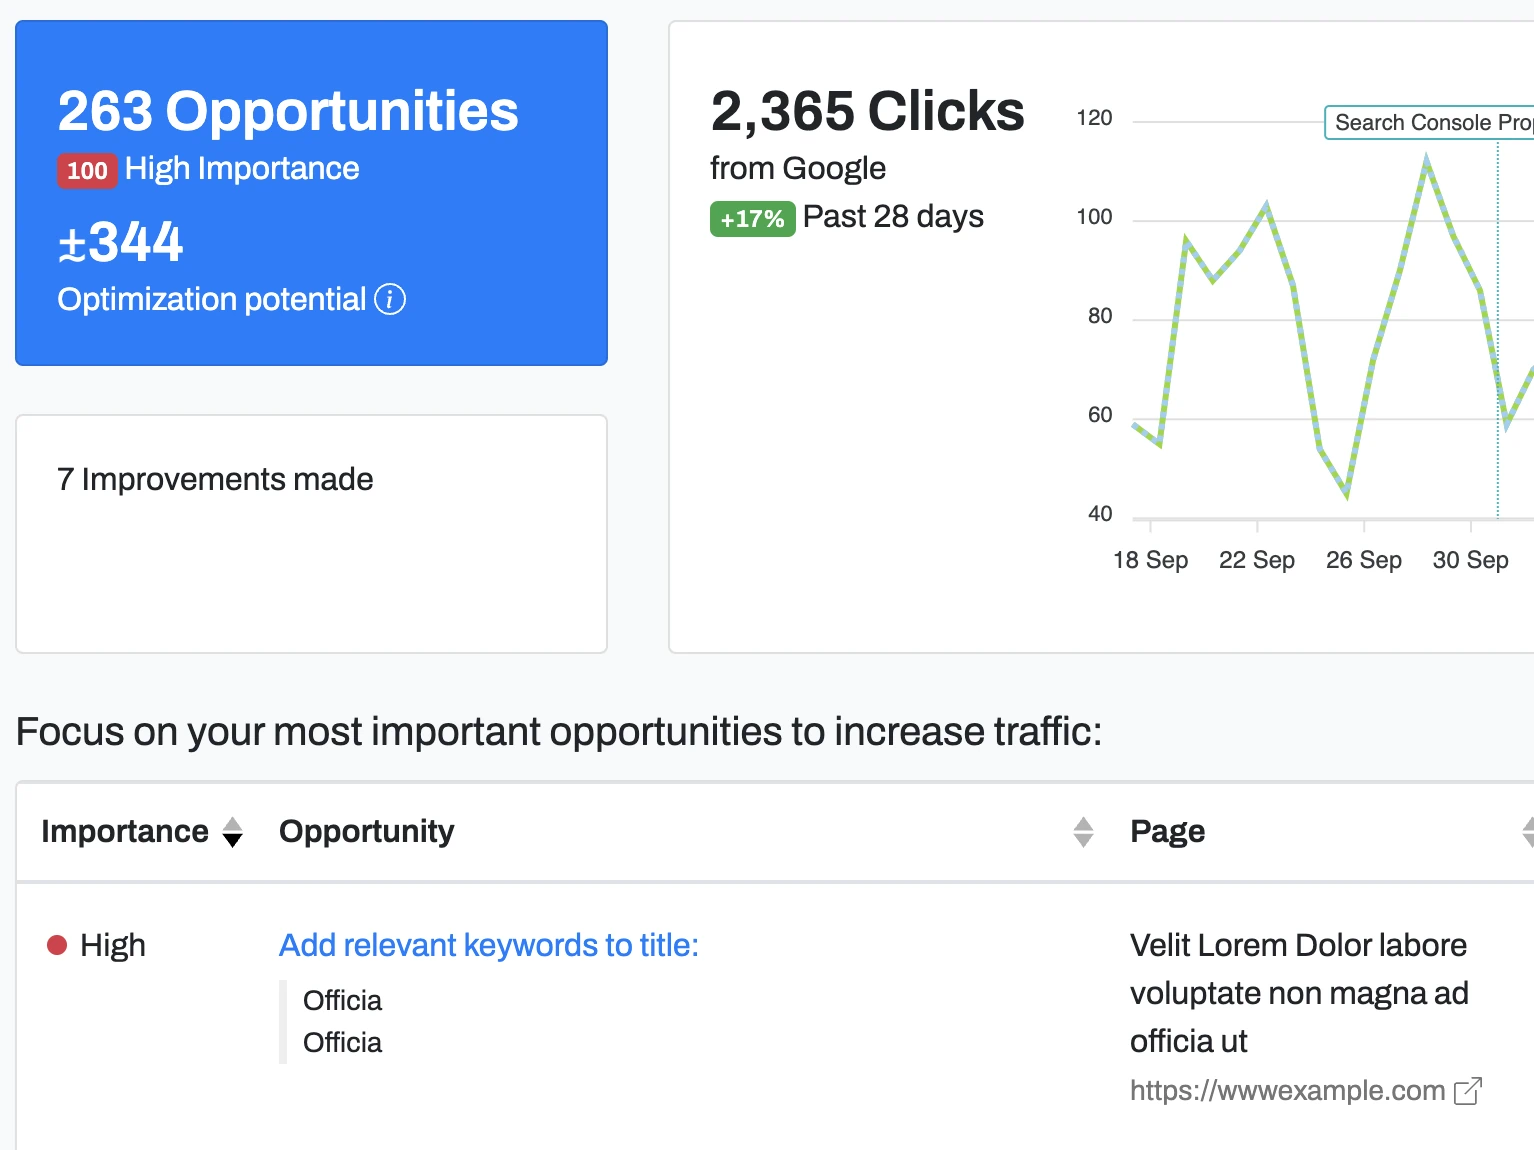 Focus on your most important opportunities to increase traffic